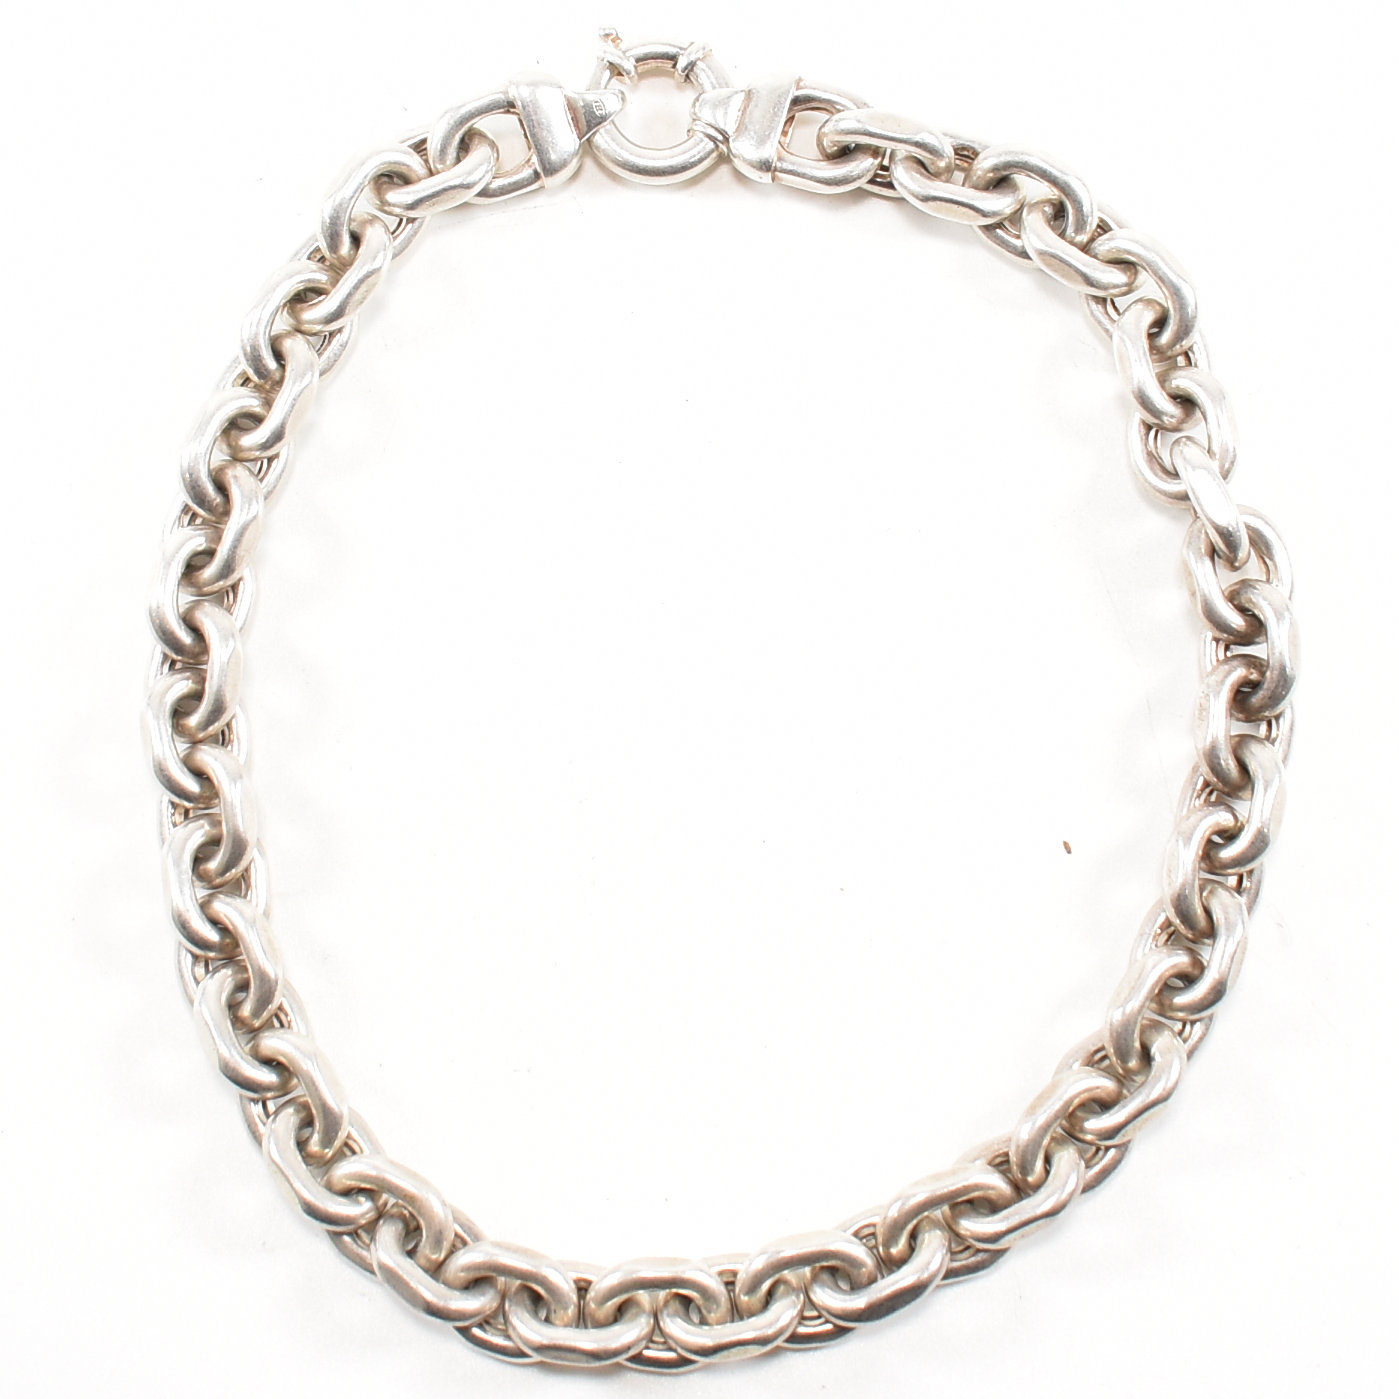 HALLMARKED 925 SILVER CABLE CHAIN NECKLACE - Image 5 of 5